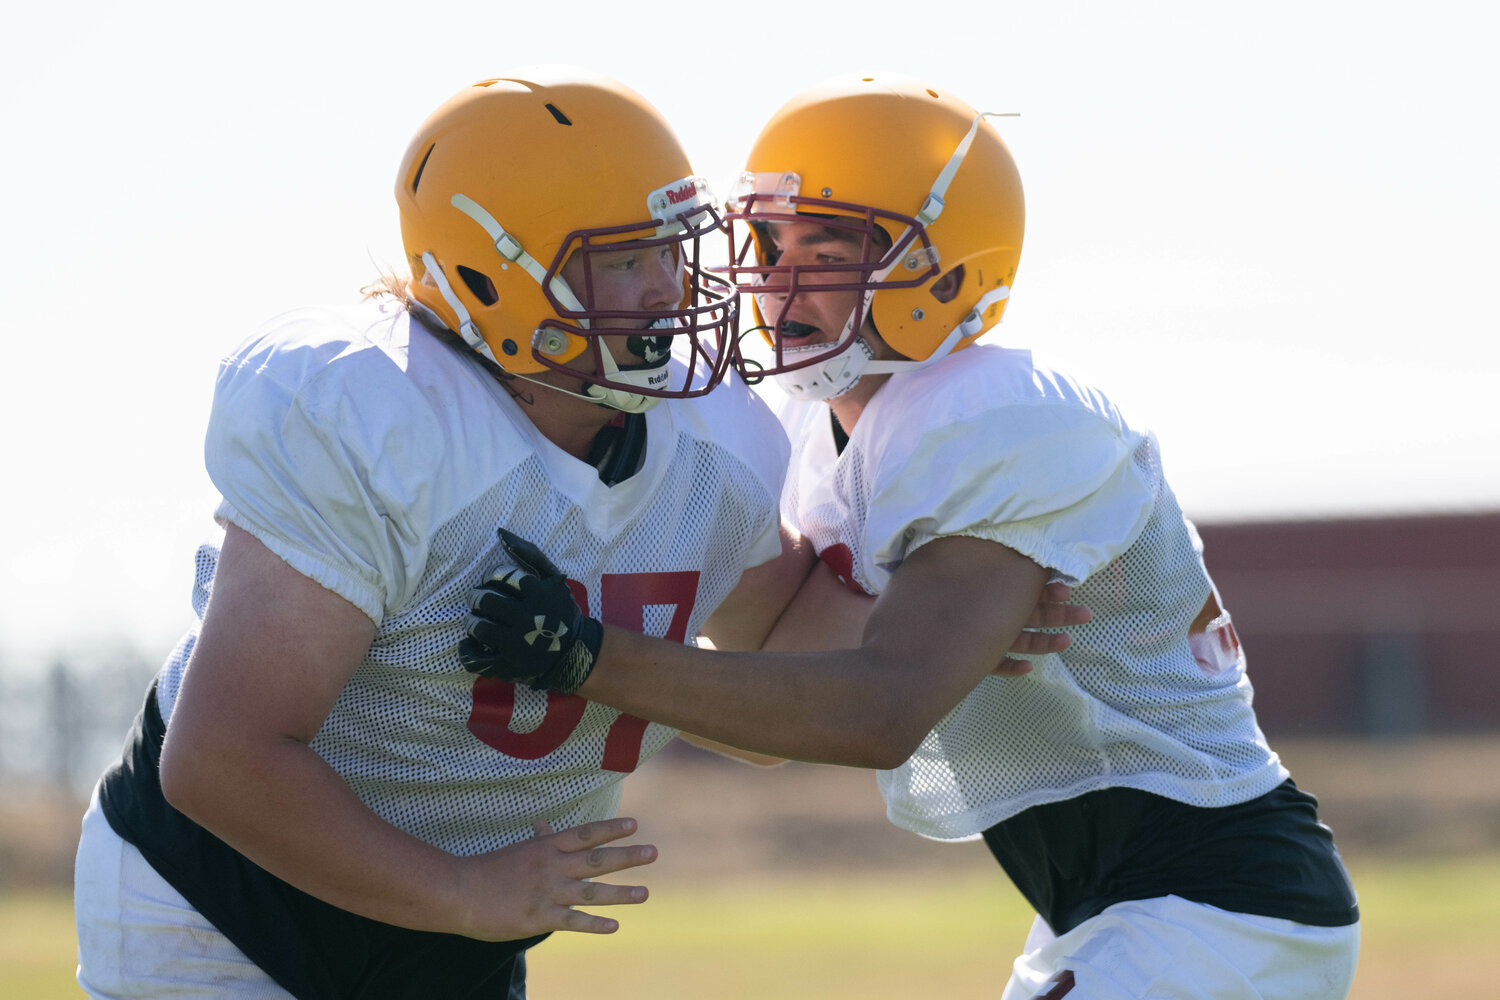 Lincoln Ruiz (right) tries to block Christian Uhri (left) during a one-on-one drill at Winlock's Aug. 19 practice.